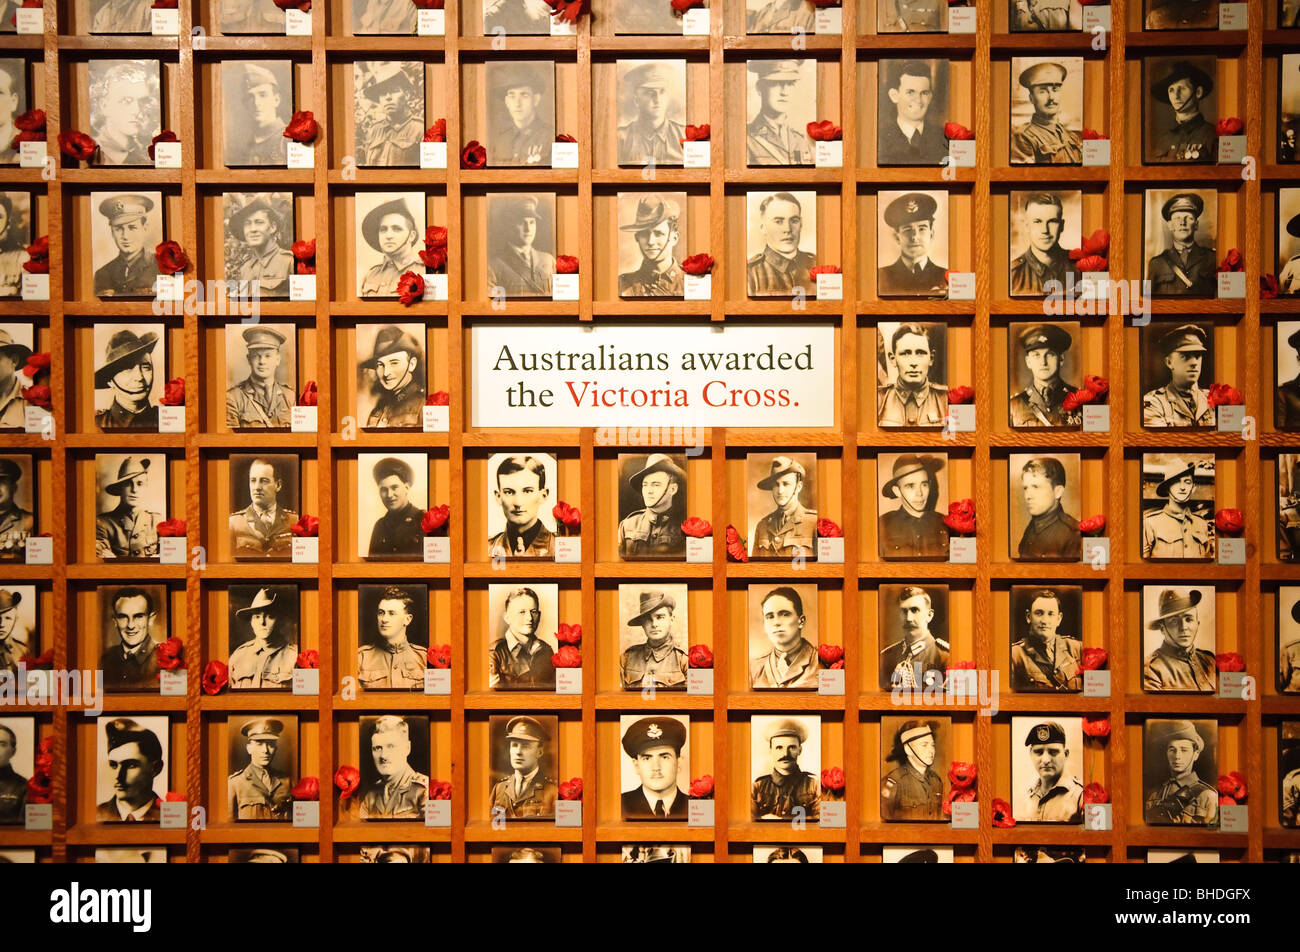 CANBERRA, Australia - Board depicting Australians who had been awarded the Victoria Cross. Australian War Memorial in Canberra, ACT, Australia The Australian War Memorial, in Canberra, is a national monument commemorating the military sacrifices made by Australians in various conflicts throughout history. Stock Photo